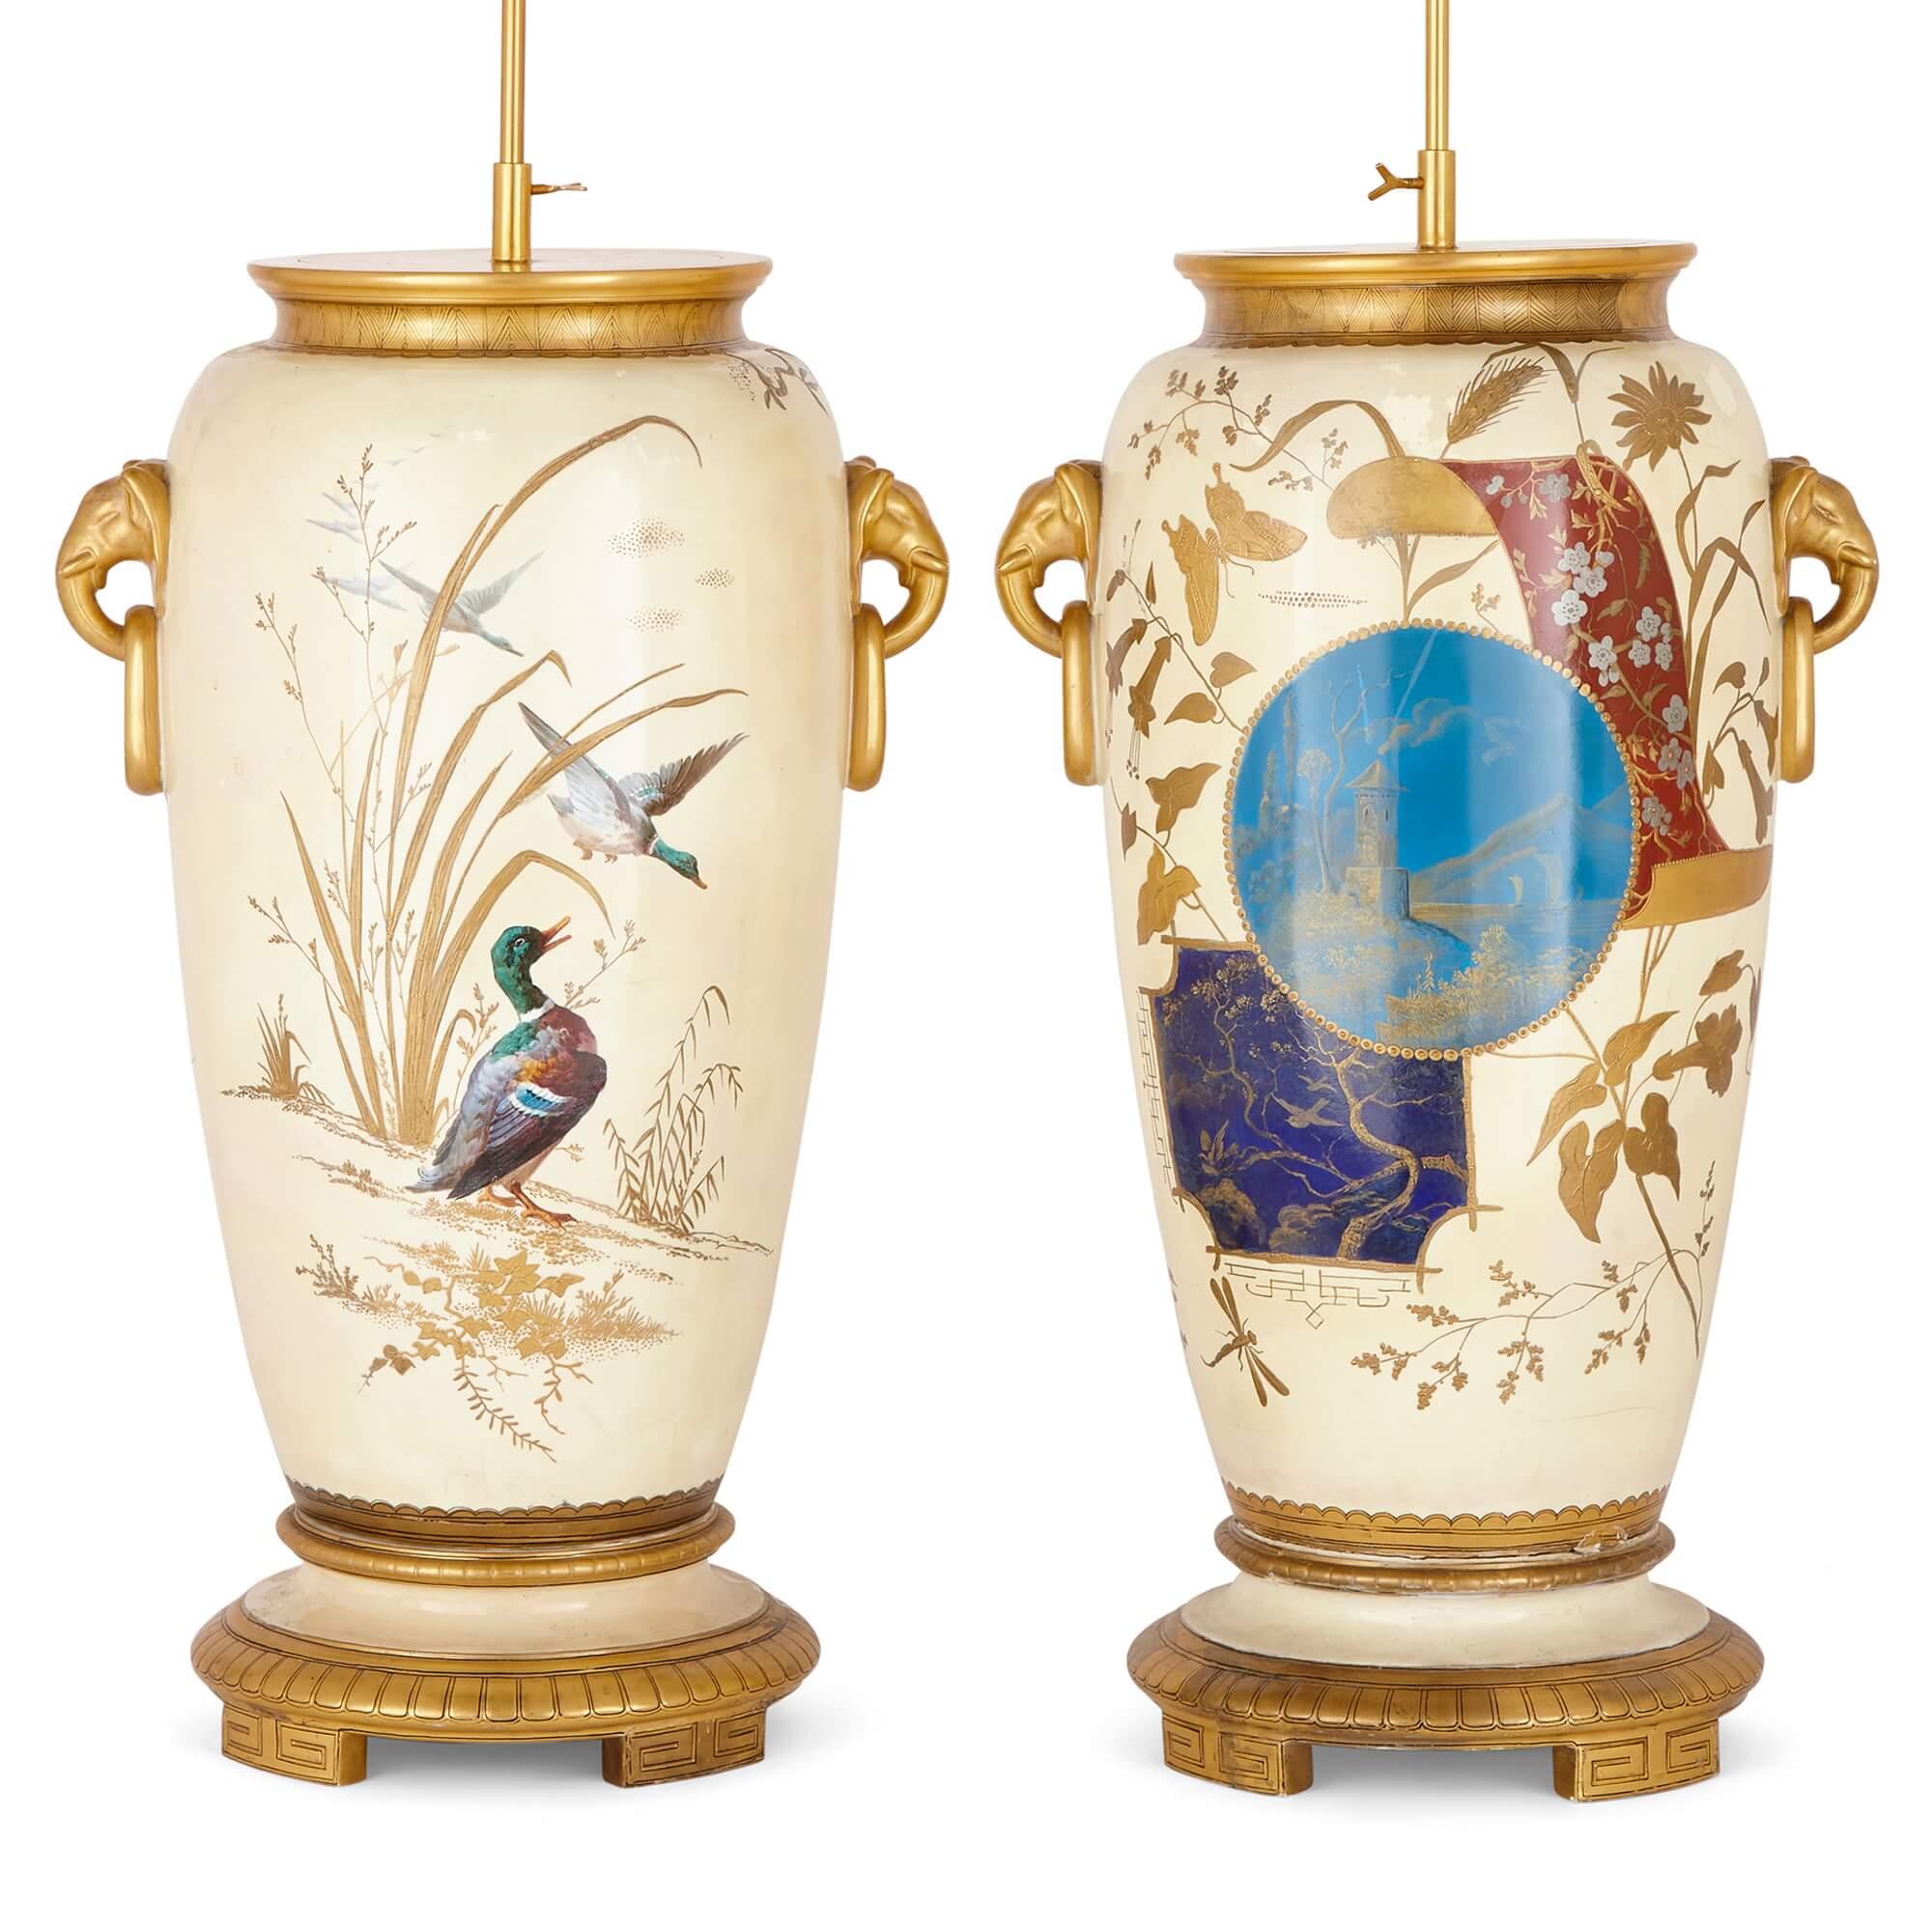 19th Century Pair of French Antique Japonisme Glazed Ceramic and Ormolu Mounted Lamps For Sale